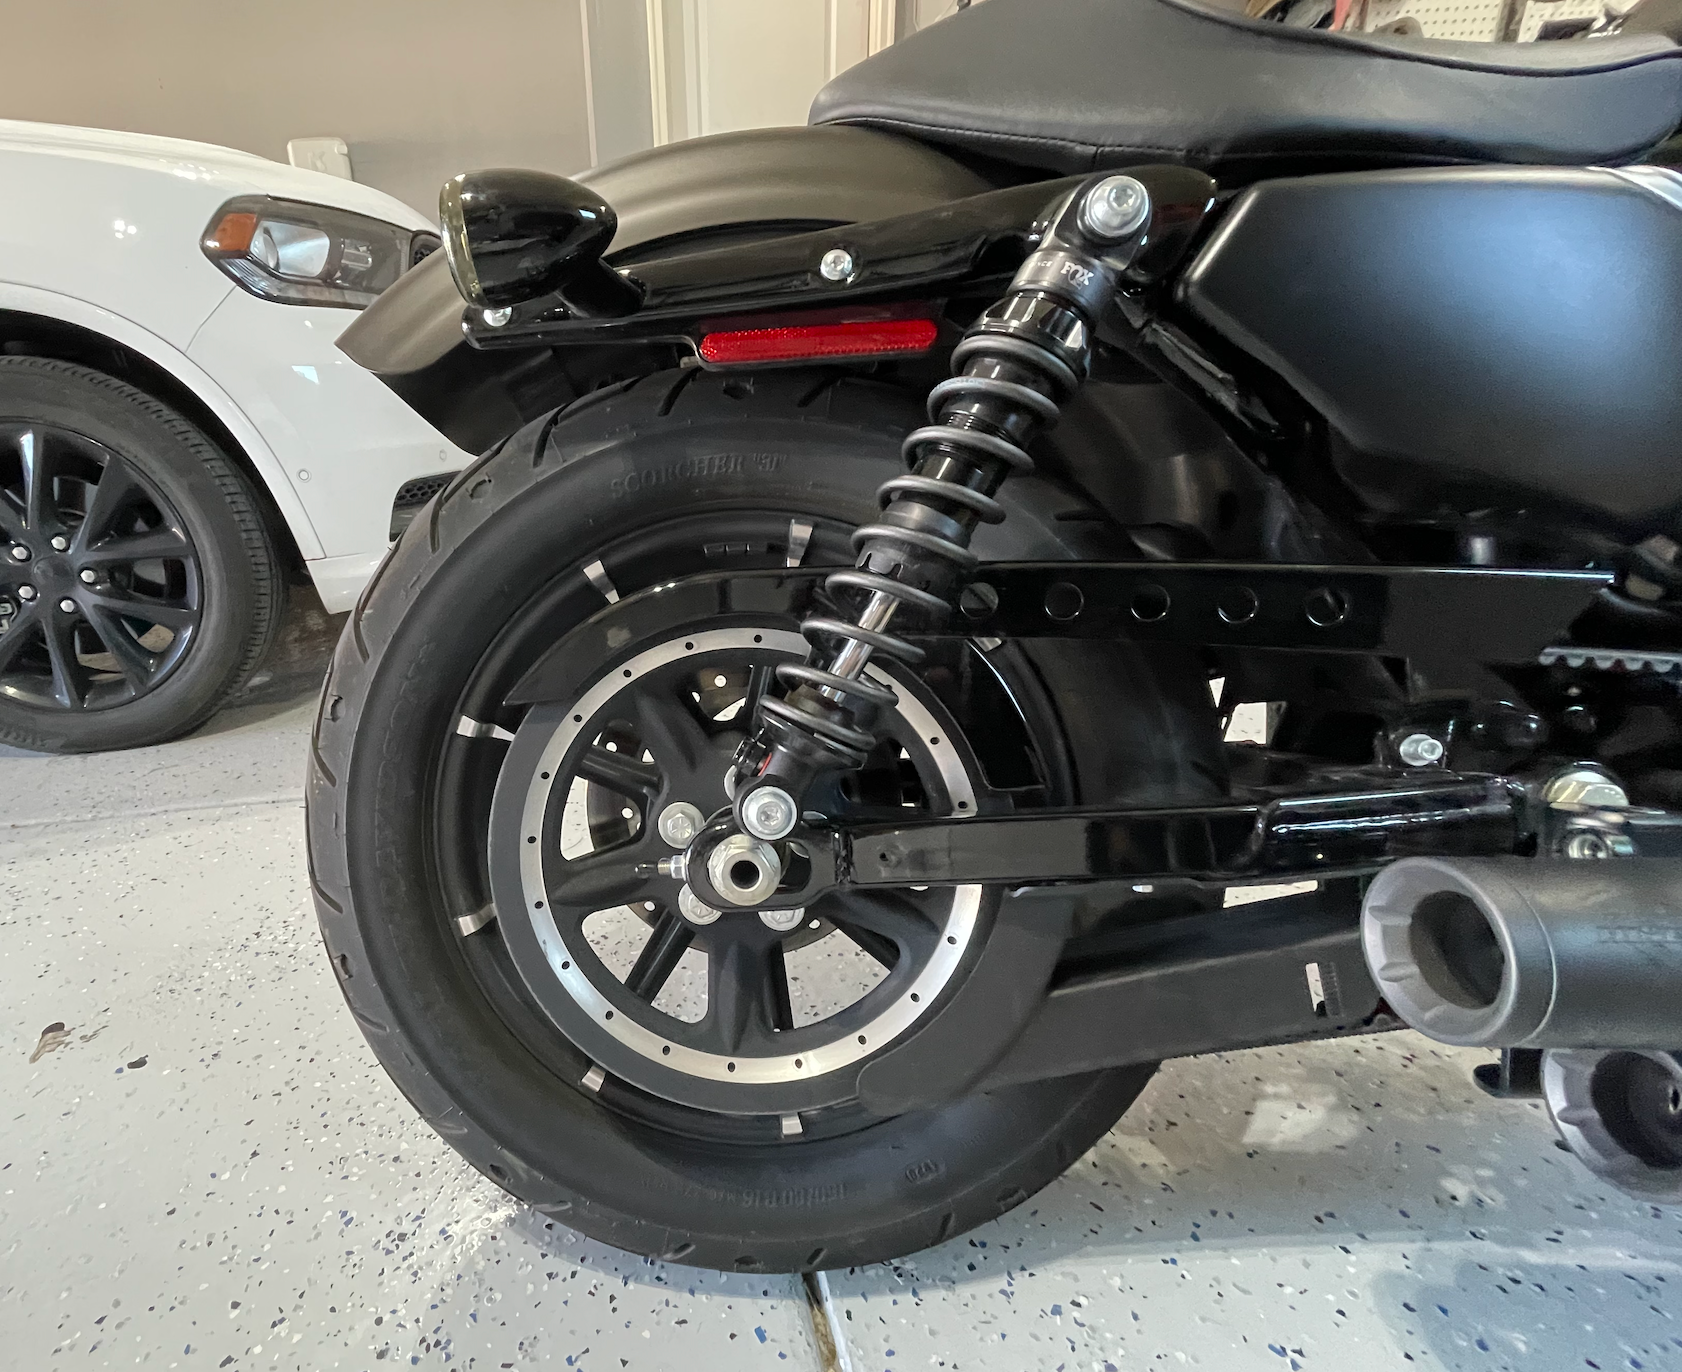 I've just put a 2.5 inch tank lift on my Iron 883 : r/Harley